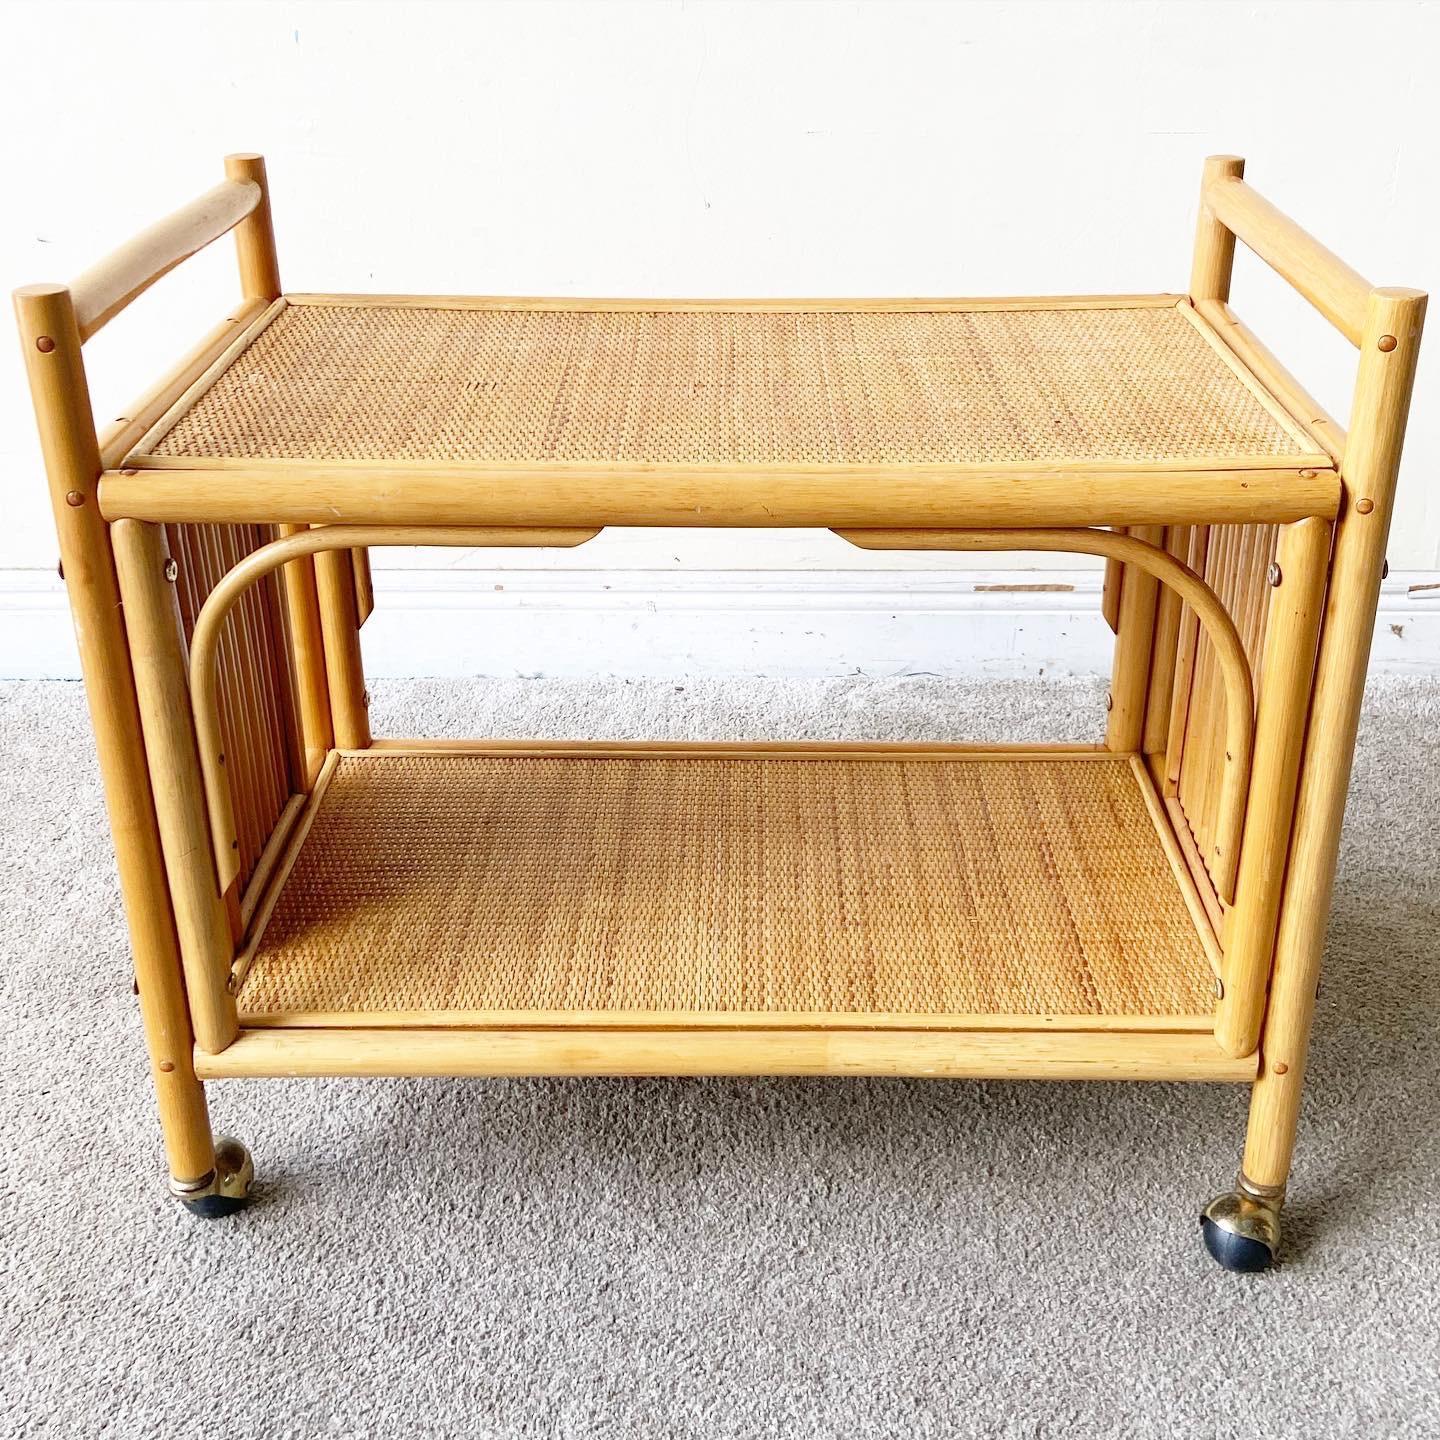 Exceptional boho chic bar cart. Features a bamboo and woven frame.
